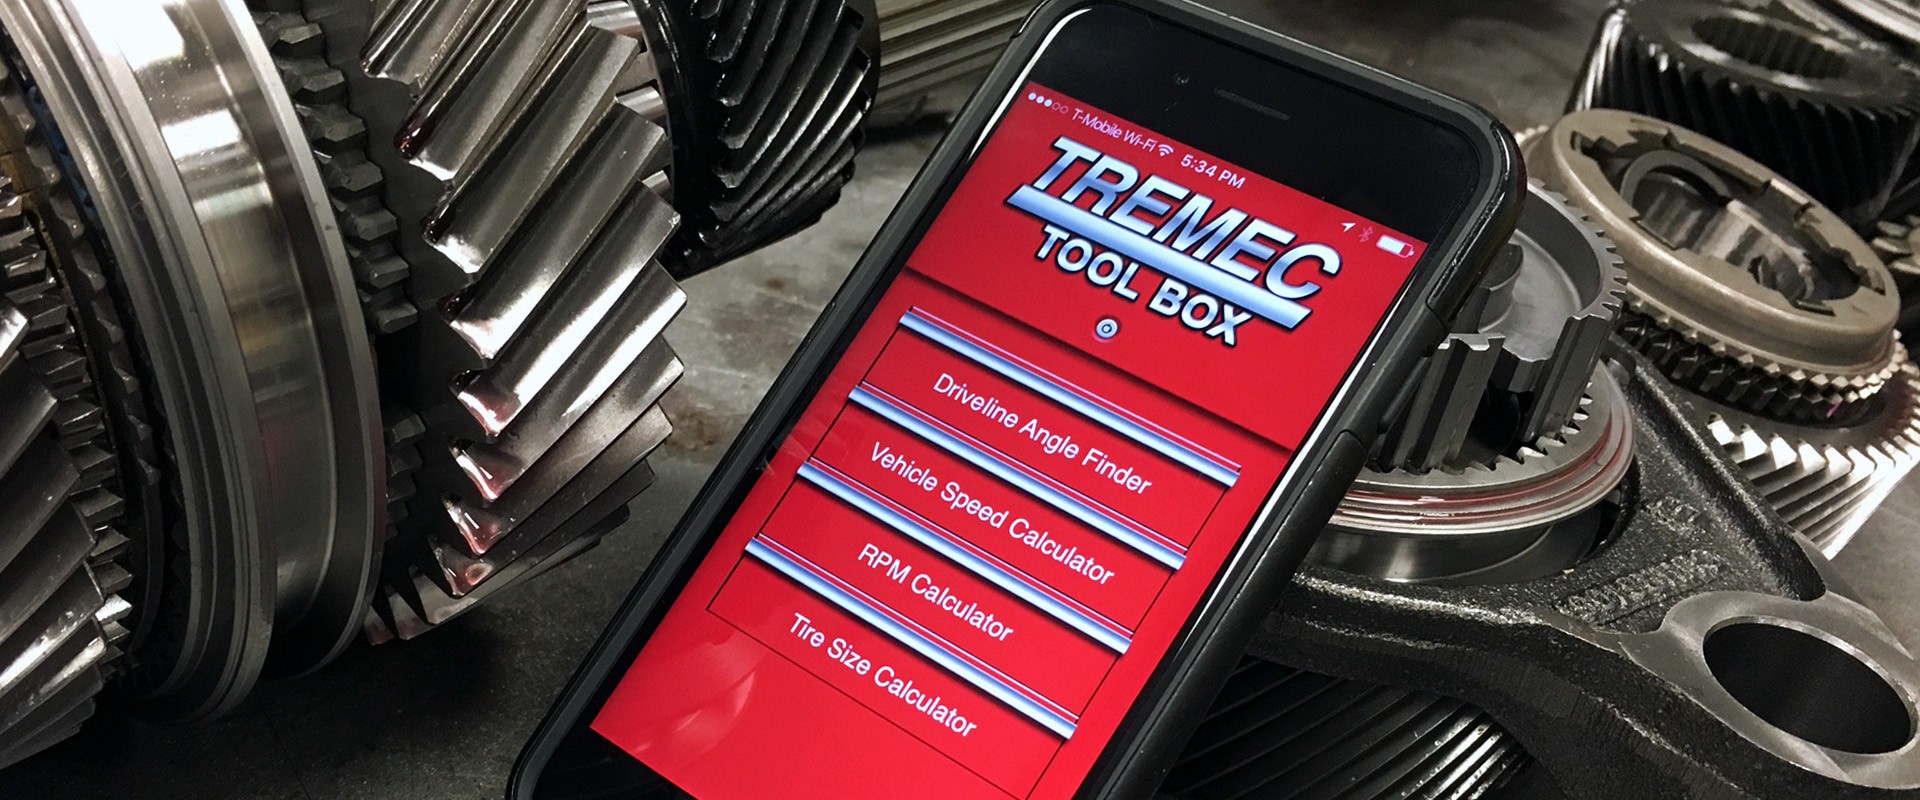 The TREMEC Toolbox App: the right tool for your next job!